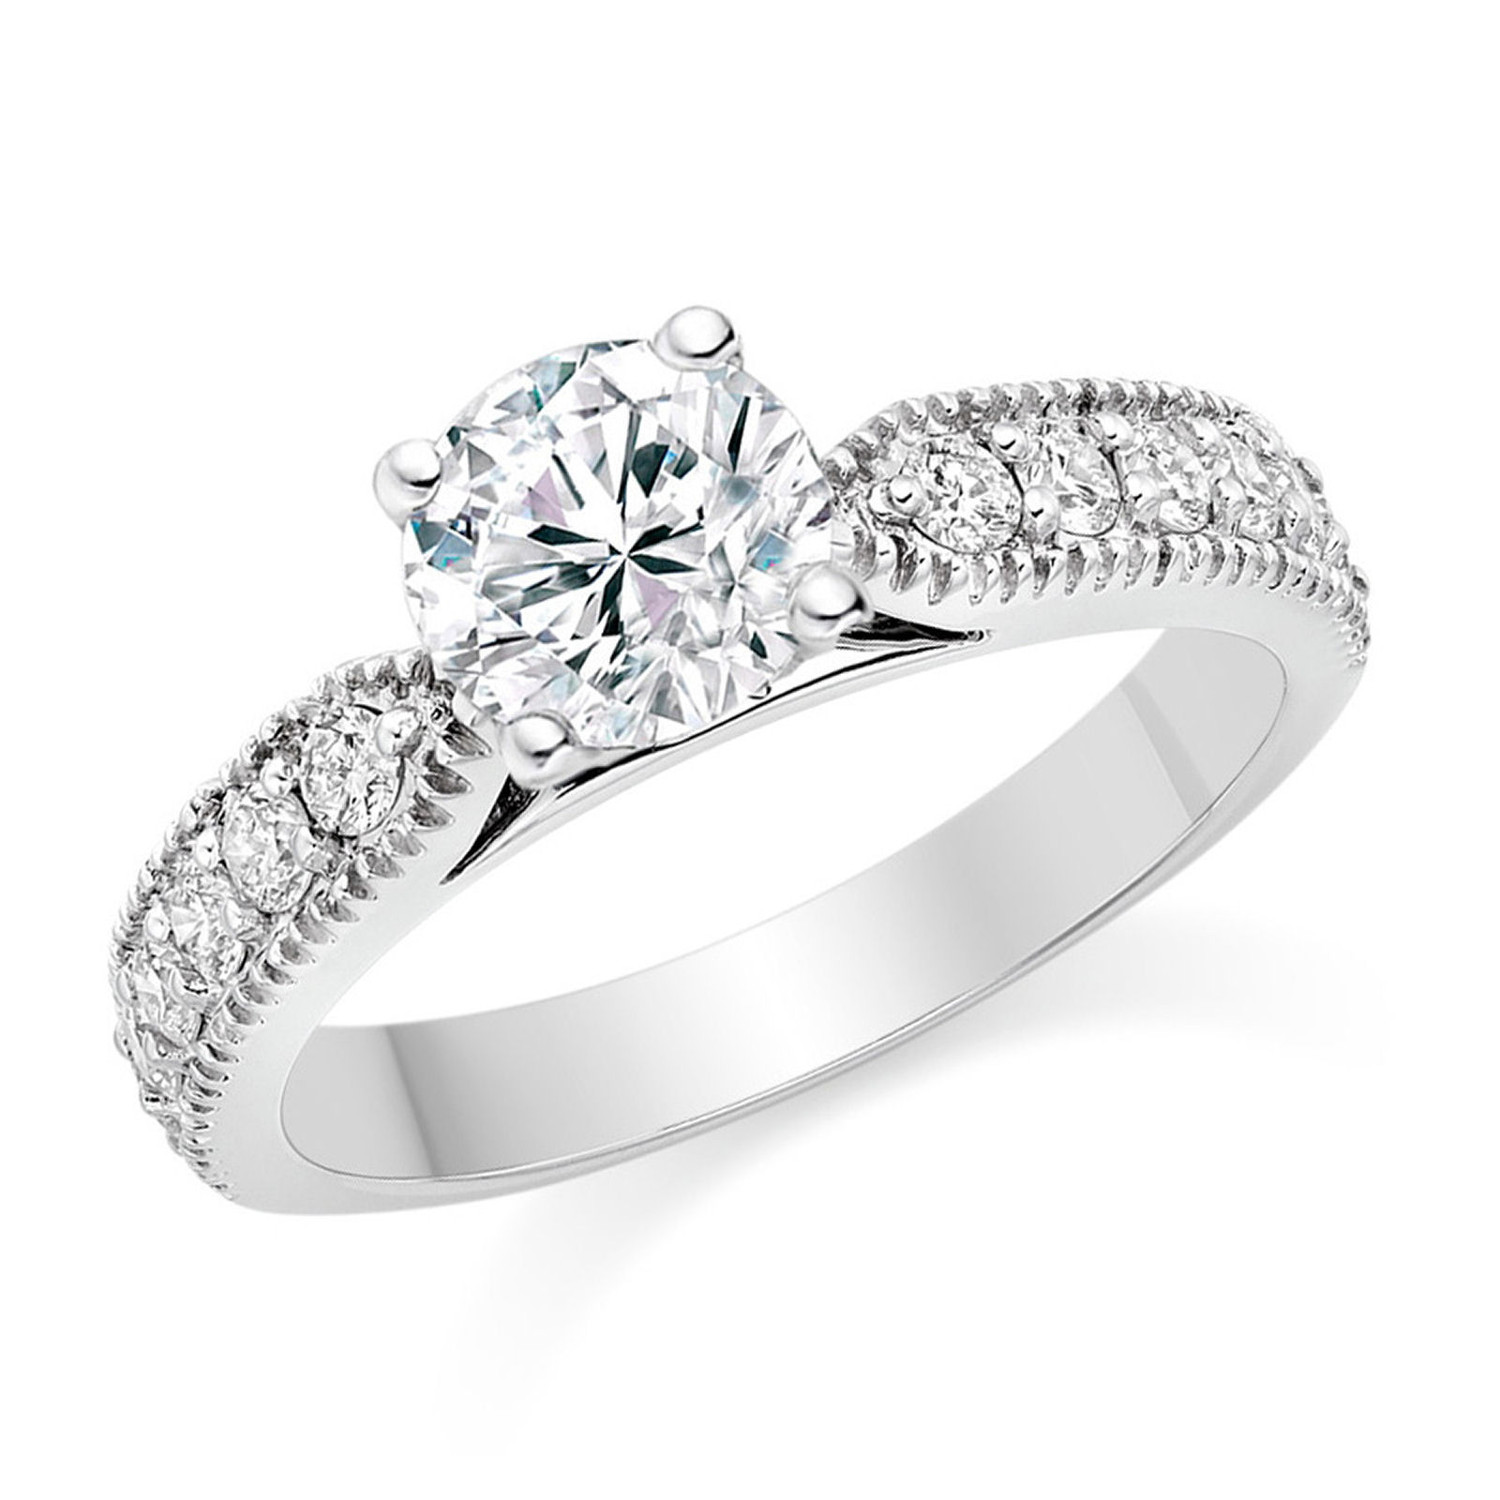 Round Cut 0.87 Carat Side Stones Engagement Ring in